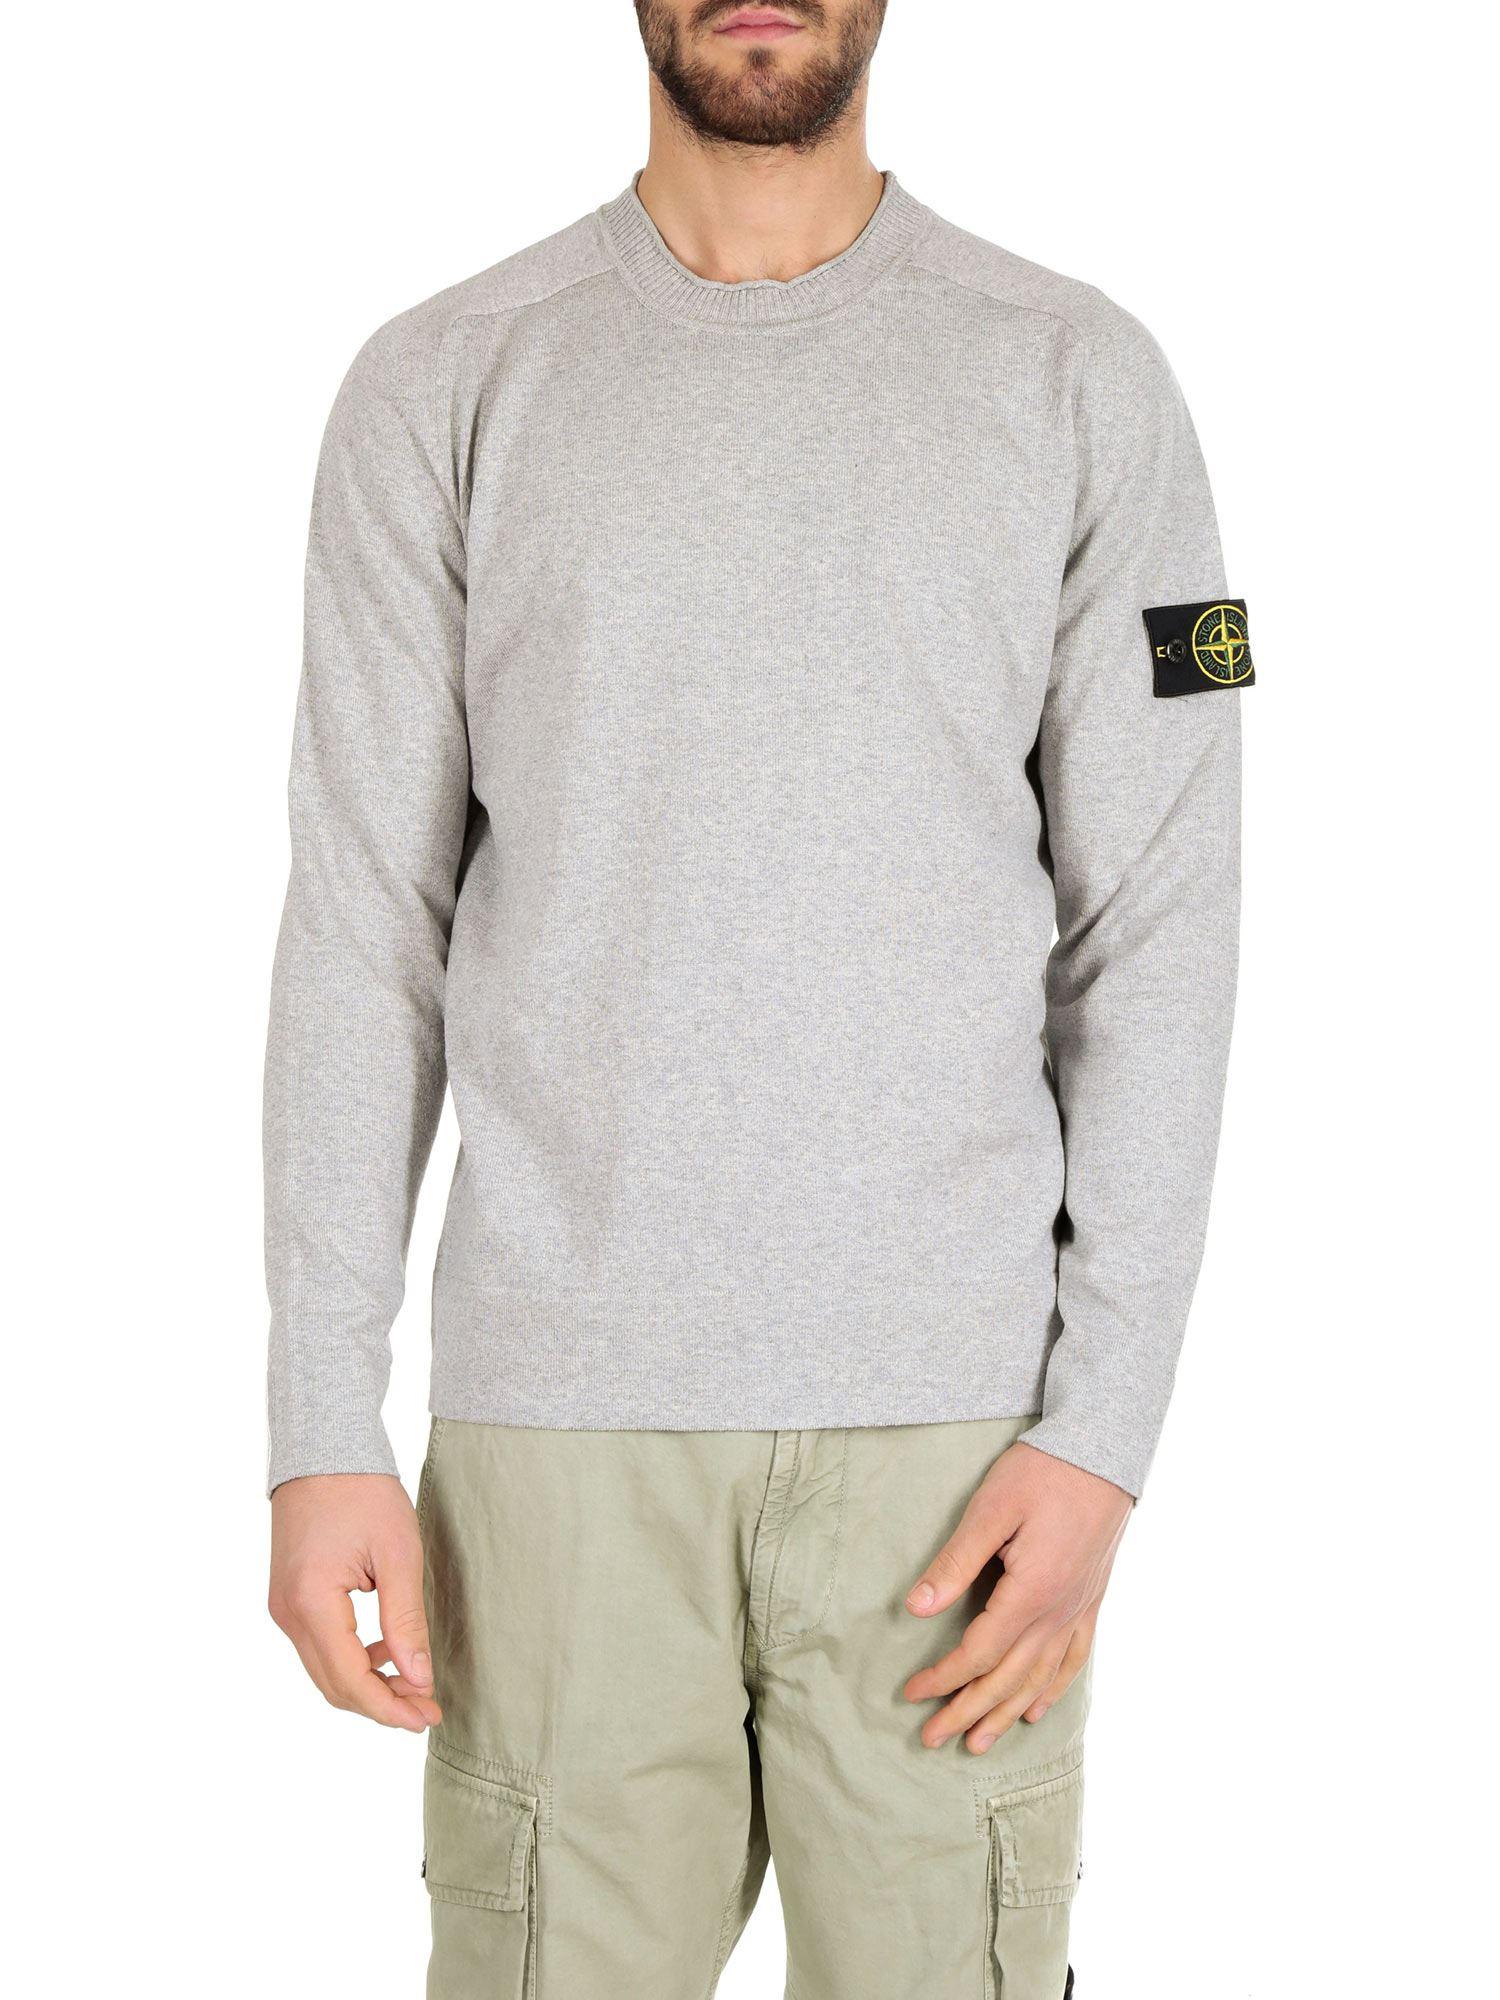 Stone Island Cotton Dust Grey Pullover With Logo in Gray for Men - Lyst